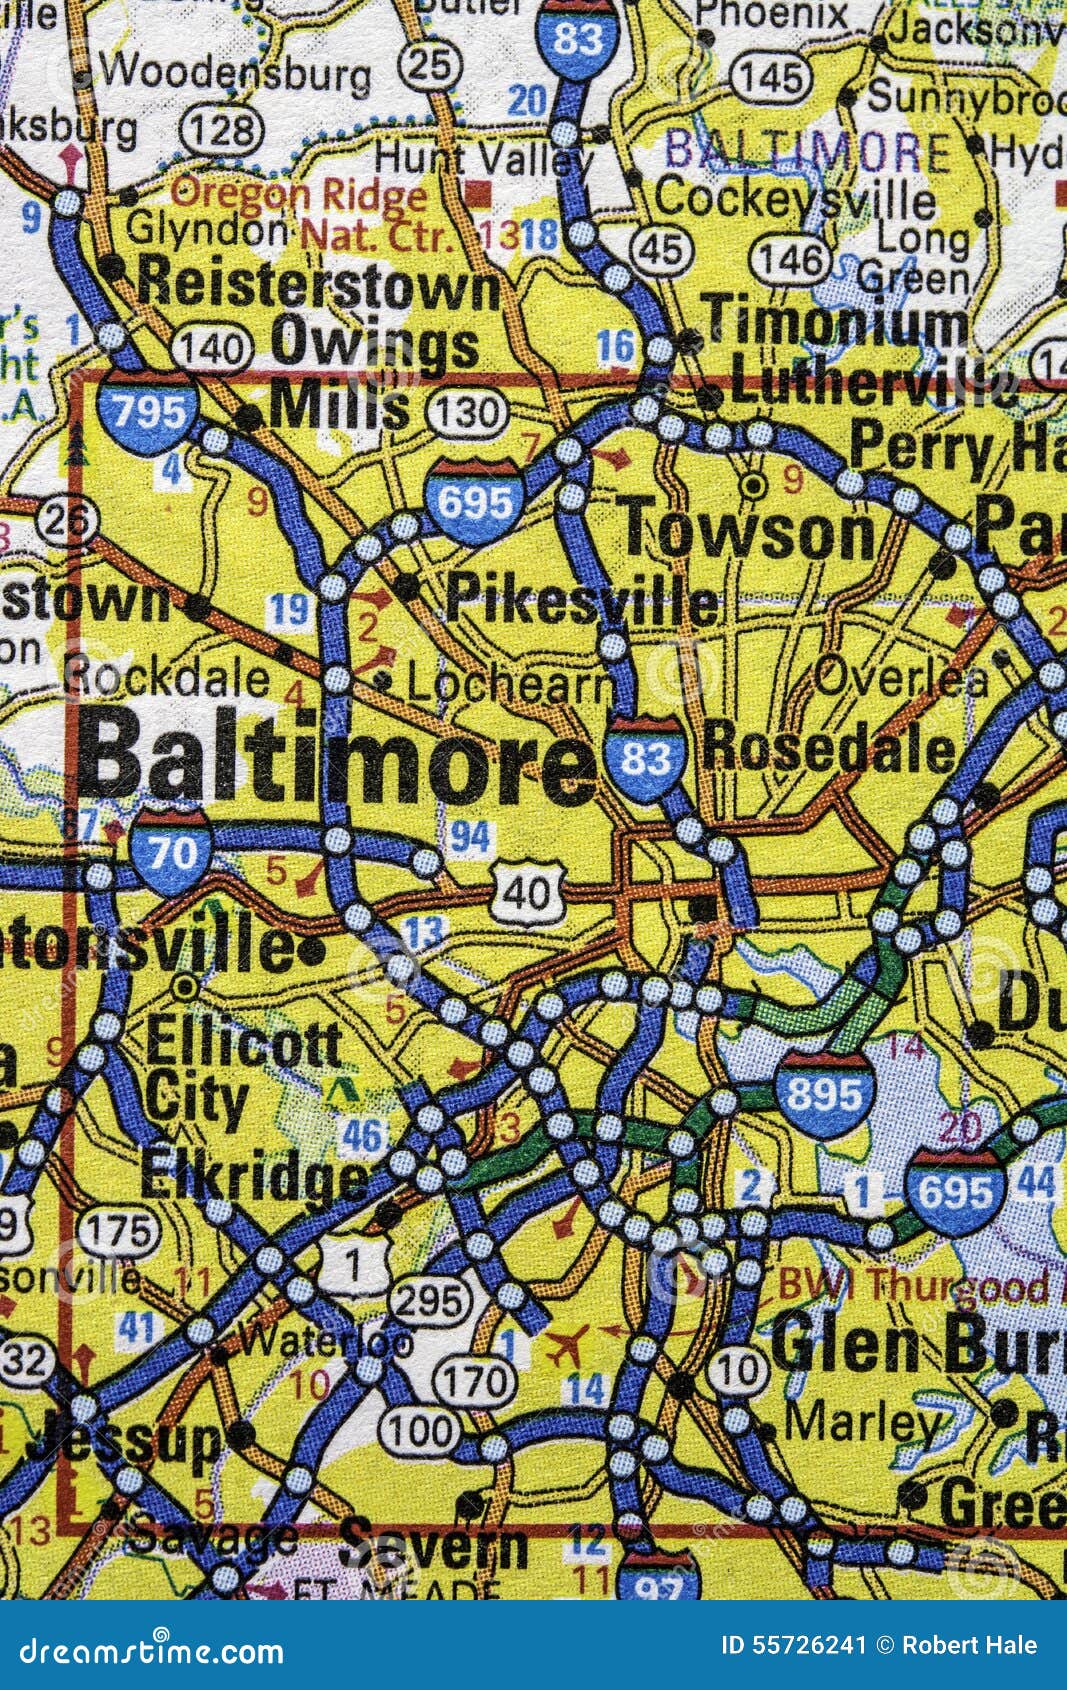 Baltimore Road Map Maryland Surrounding Area 55726241 